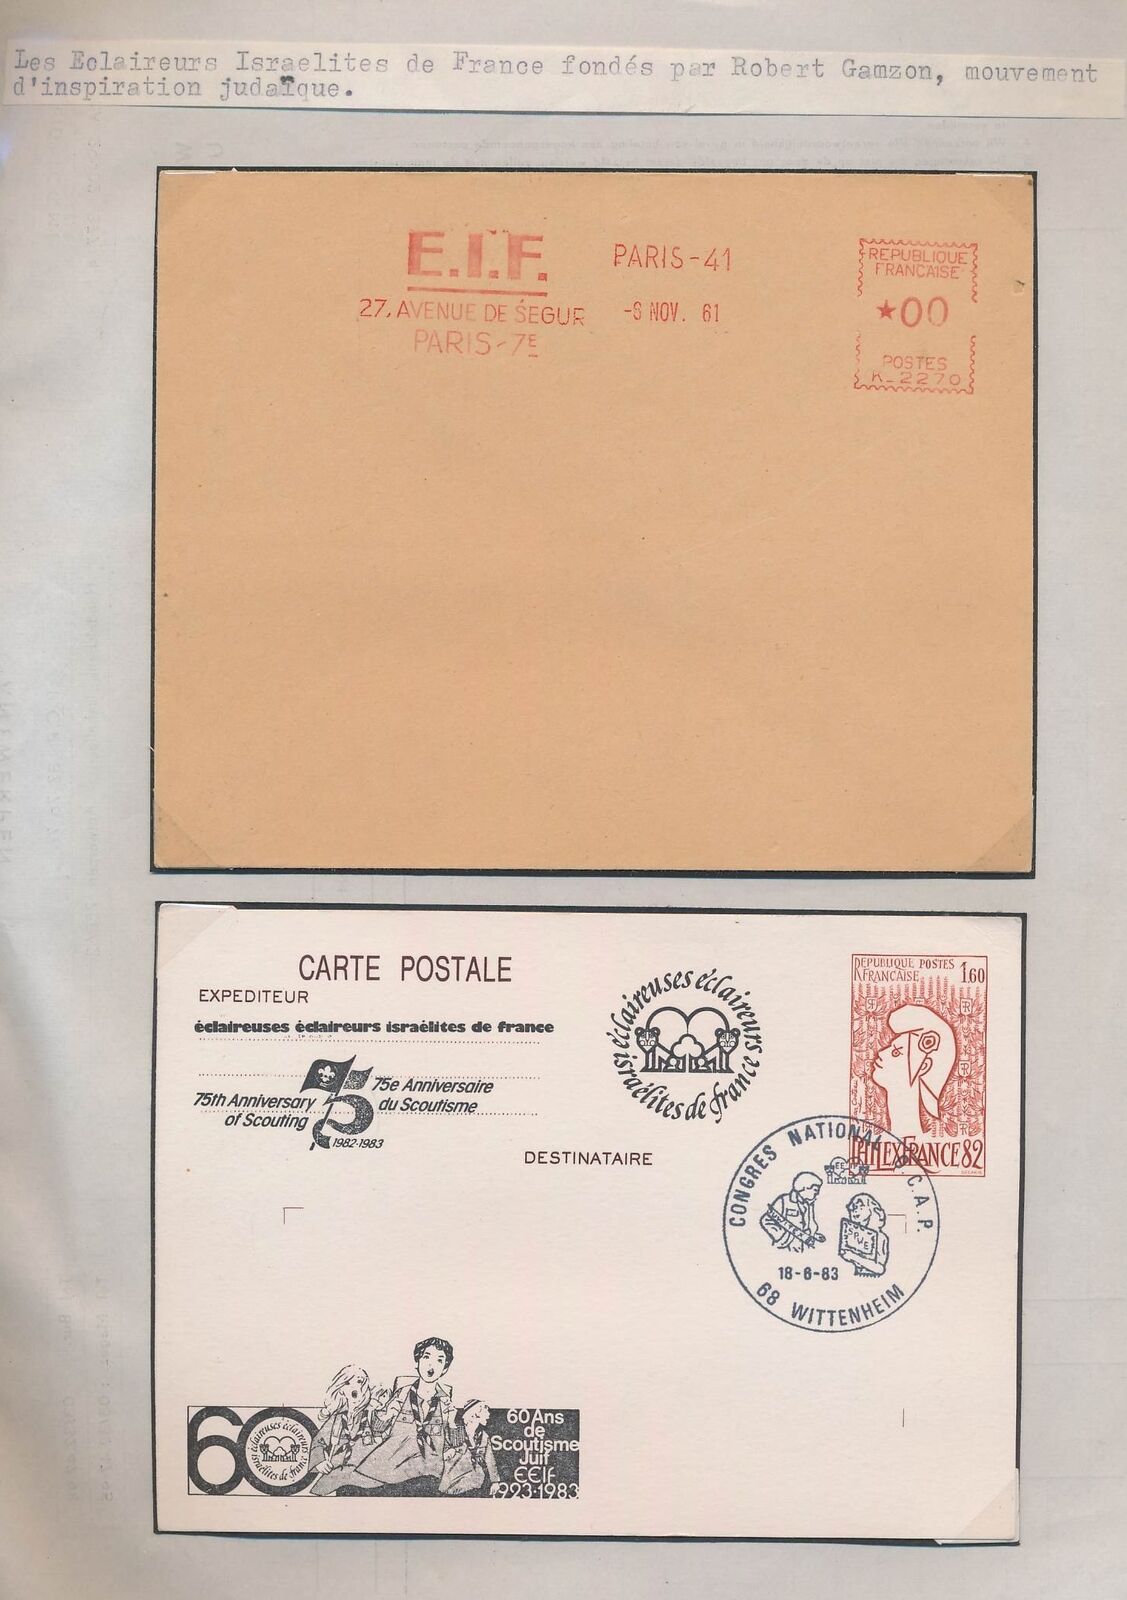 Xc83834 France 1961 -1983 Anniversary Scouting Covers Used